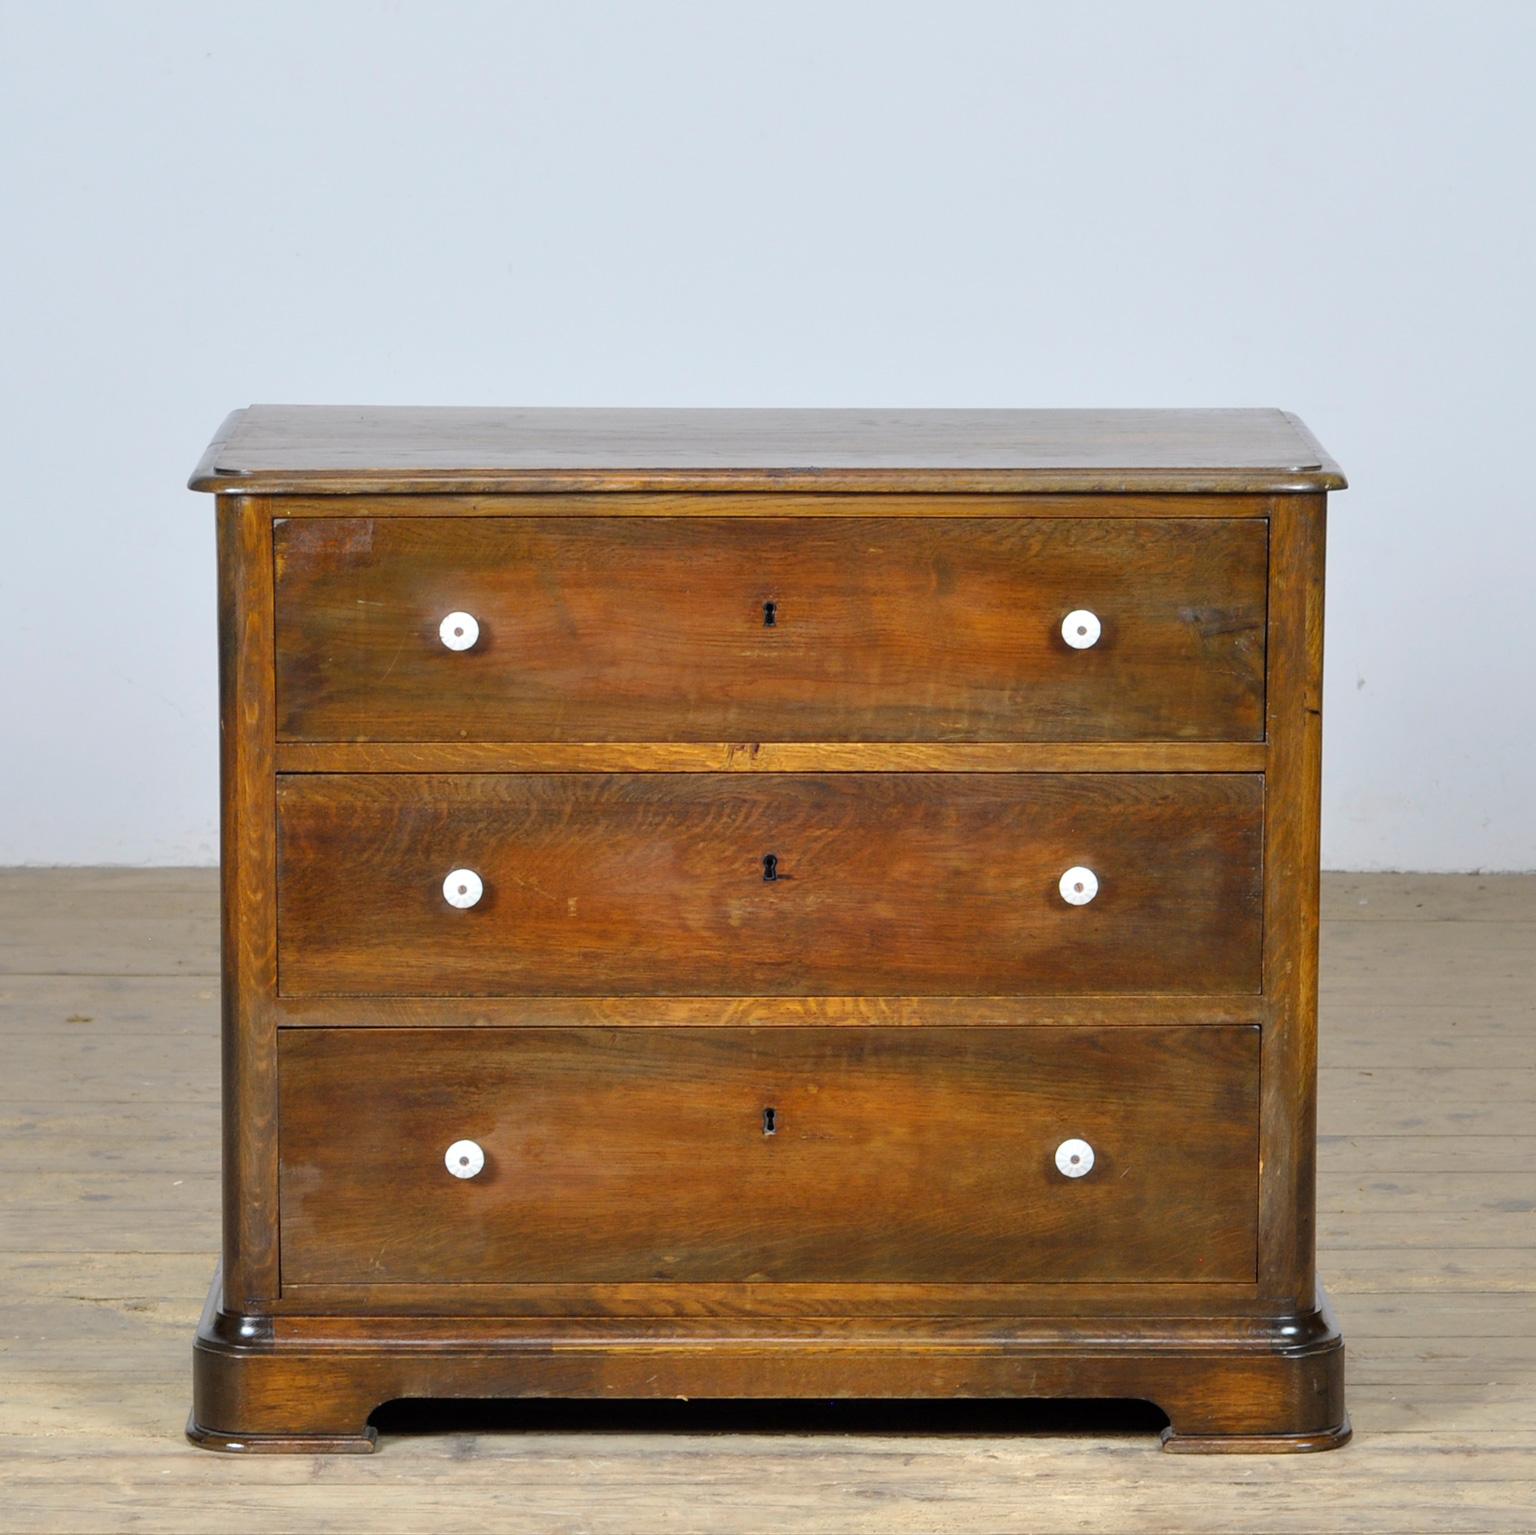 A beautiful antique oak and pine chest of drawers from around 1920. The chest of drawers has 3 drawers, the bottom of which is higher. The drawers are made with dovetail joints and fitted with porcelain knobs. The chest of drawers stands on rounded